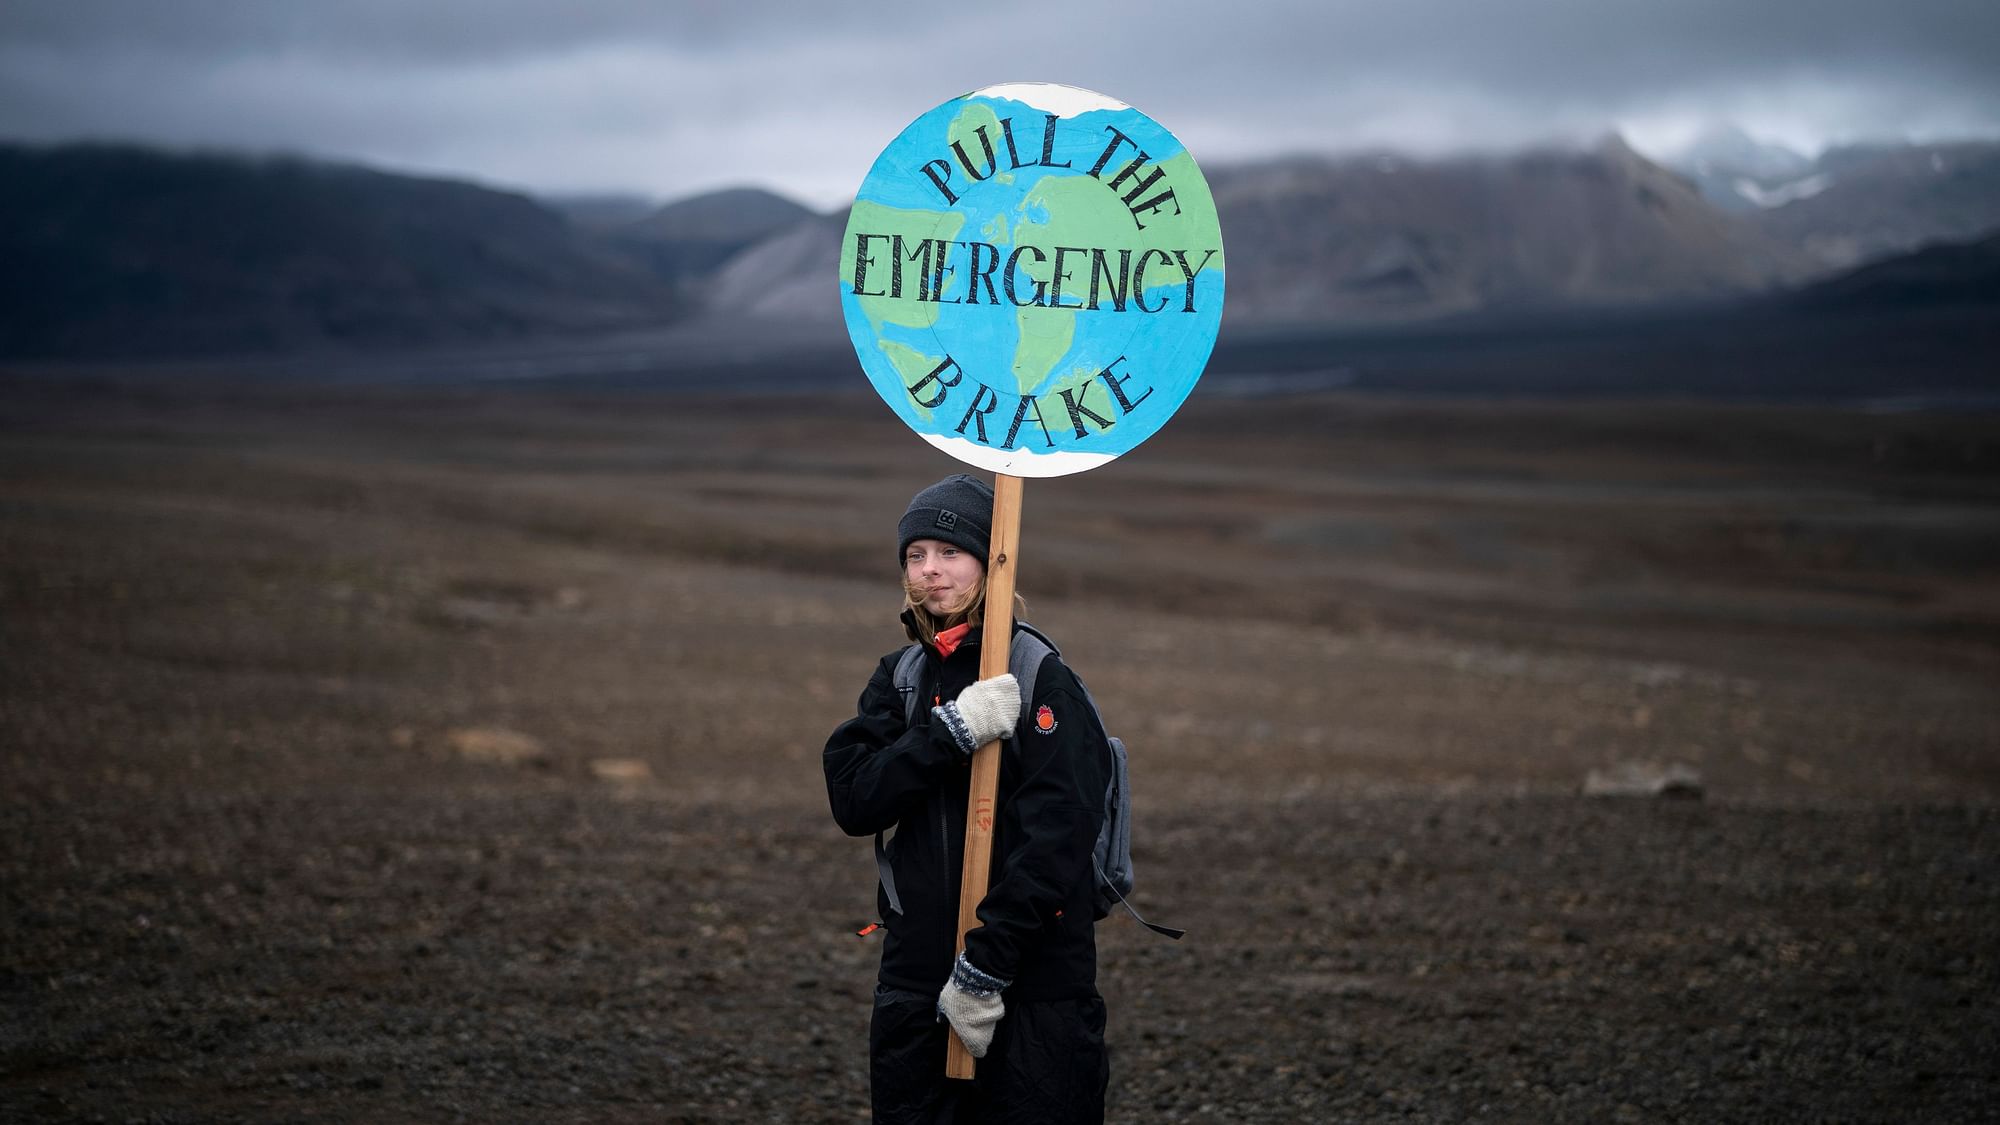 A girl holds a sign that reads ‘pull the emergency brake’ as she attends a ceremony in the area which once was the Okjokull glacier, in Iceland, 18 August 2019.